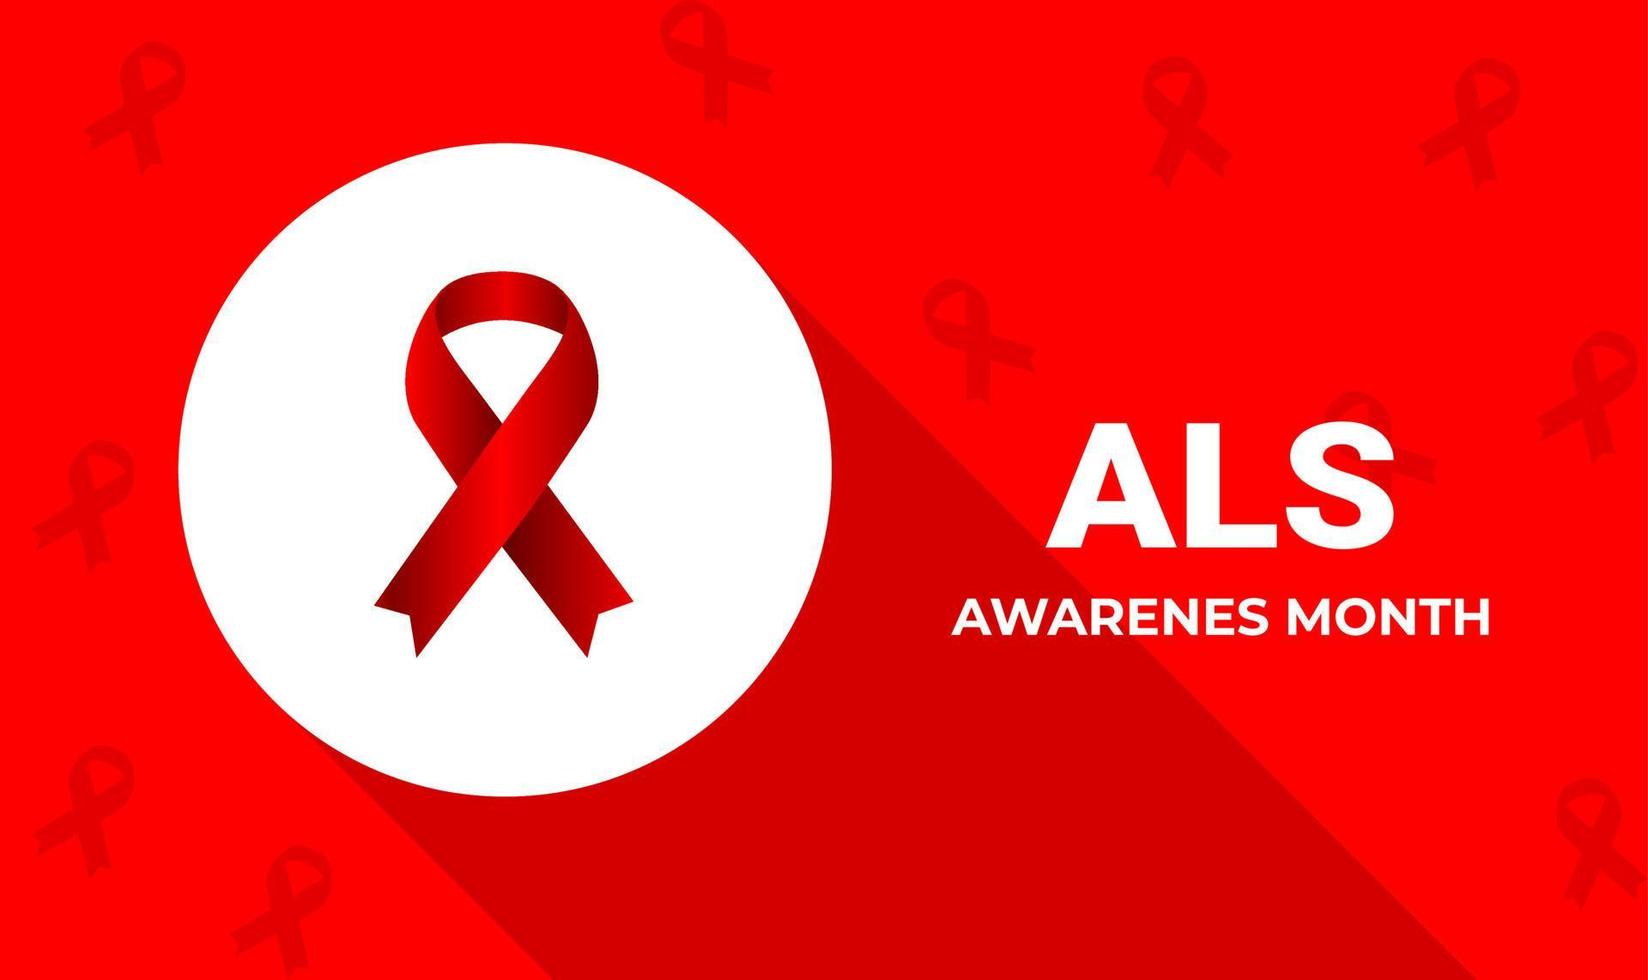 ALS Amyotrophic lateral sclerosis awareness month background.  ALS Awareness Month background. Amyotrophic lateral sclerosis. Annual campaign is held in May in United States. Vector illustration.